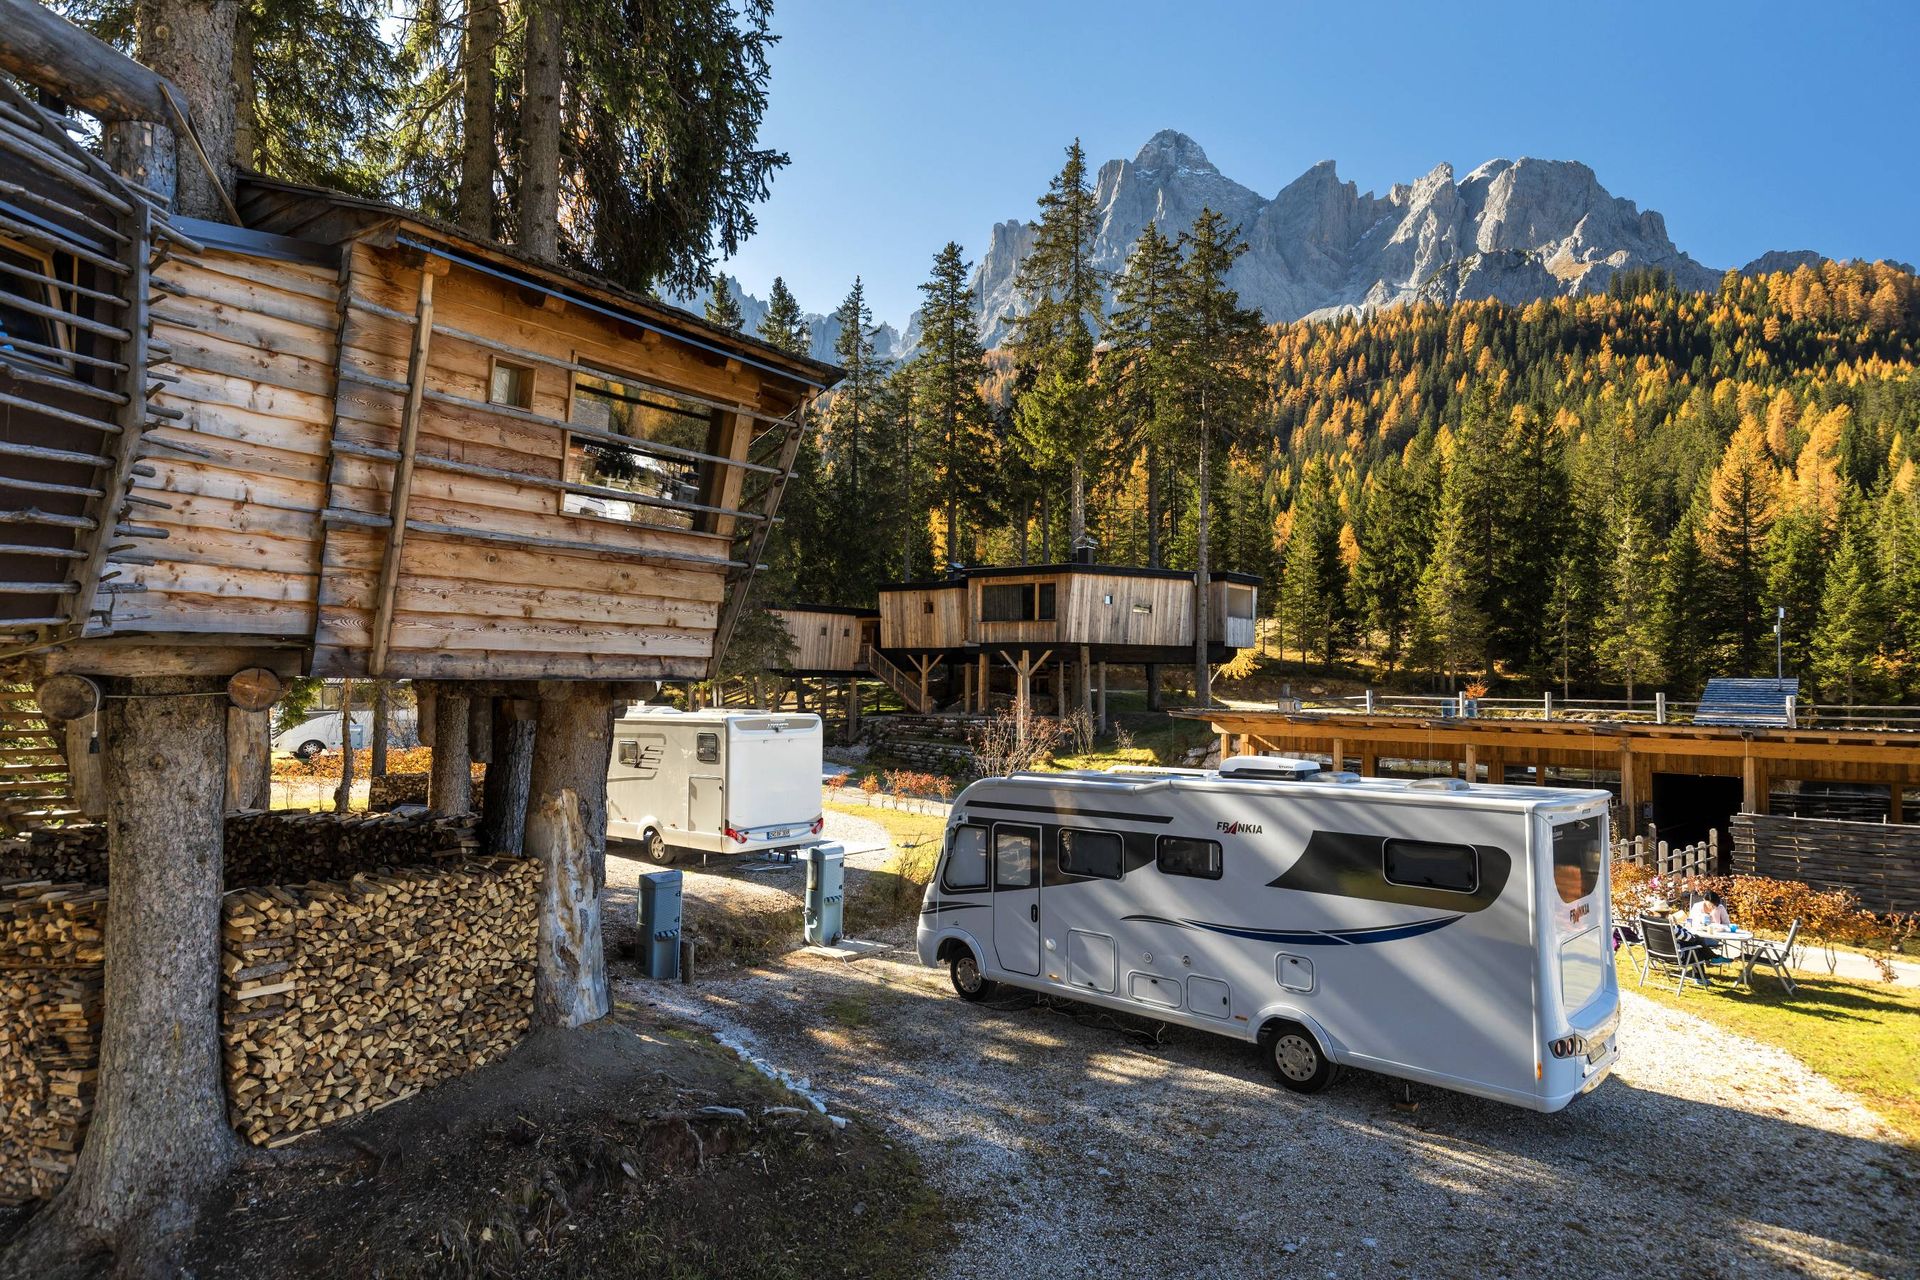 Camping and hotel for families with children in the Dolomites - Caravan Park Sexten – main image